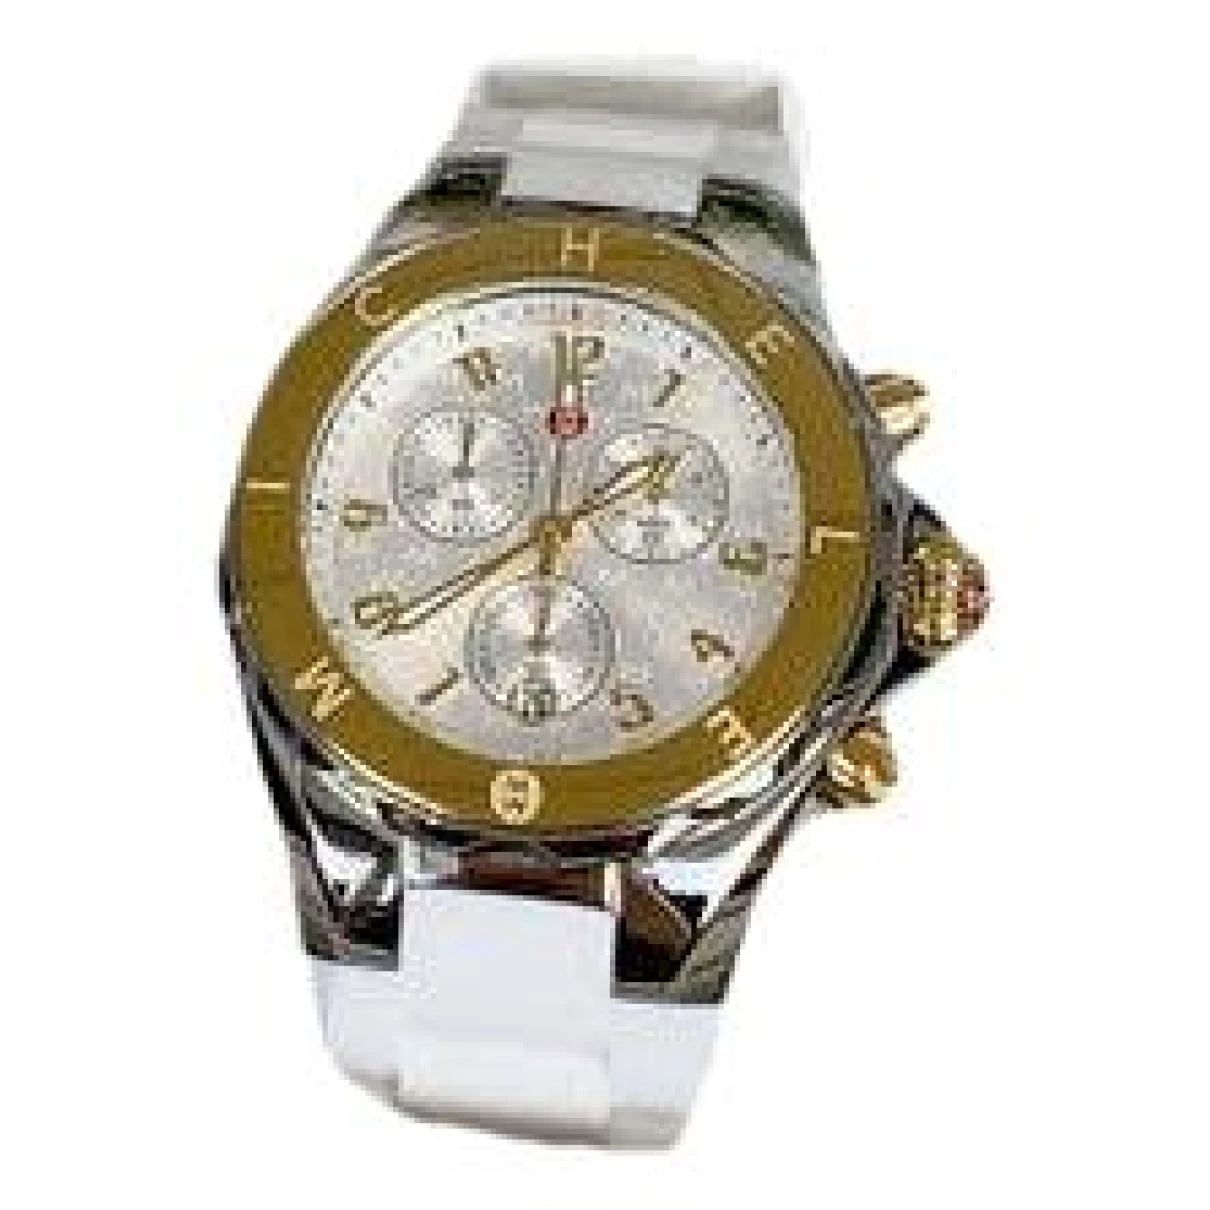 Pre-owned Michele Watch In Silver